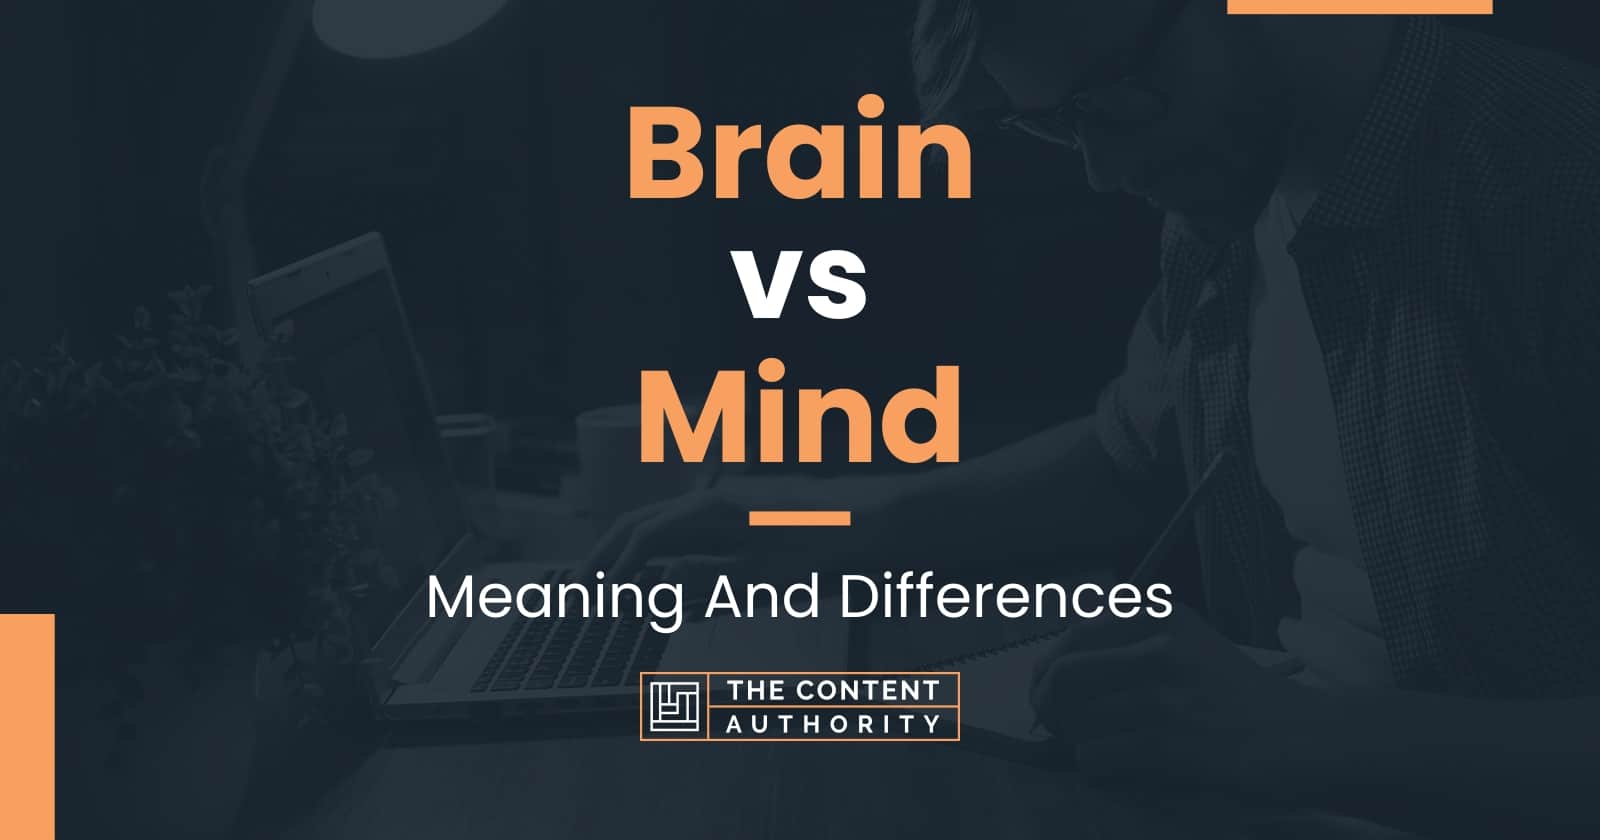 Brain vs Mind: Meaning And Differences